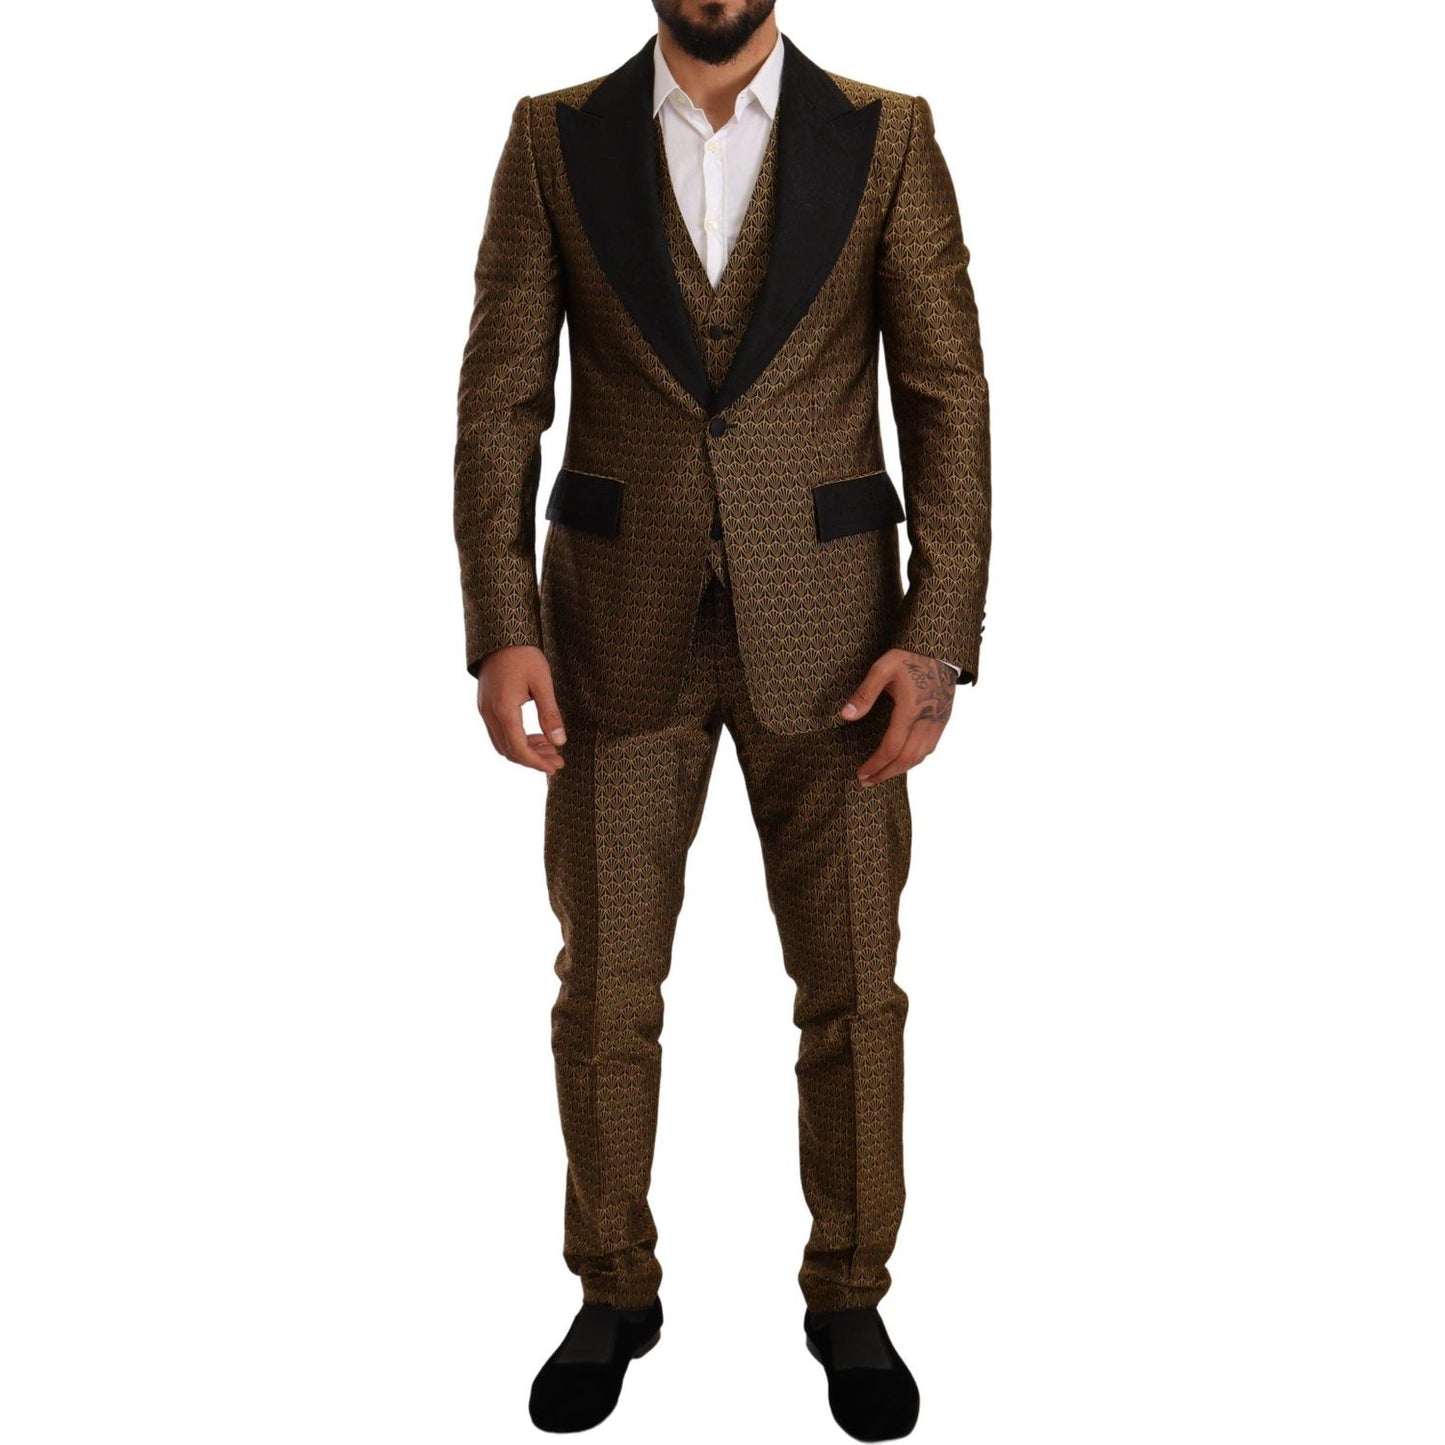 Dolce & Gabbana Elegant Yellow Patterned Three-Piece Suit black-yellow-slim-fit-3-piece-one-button-suit